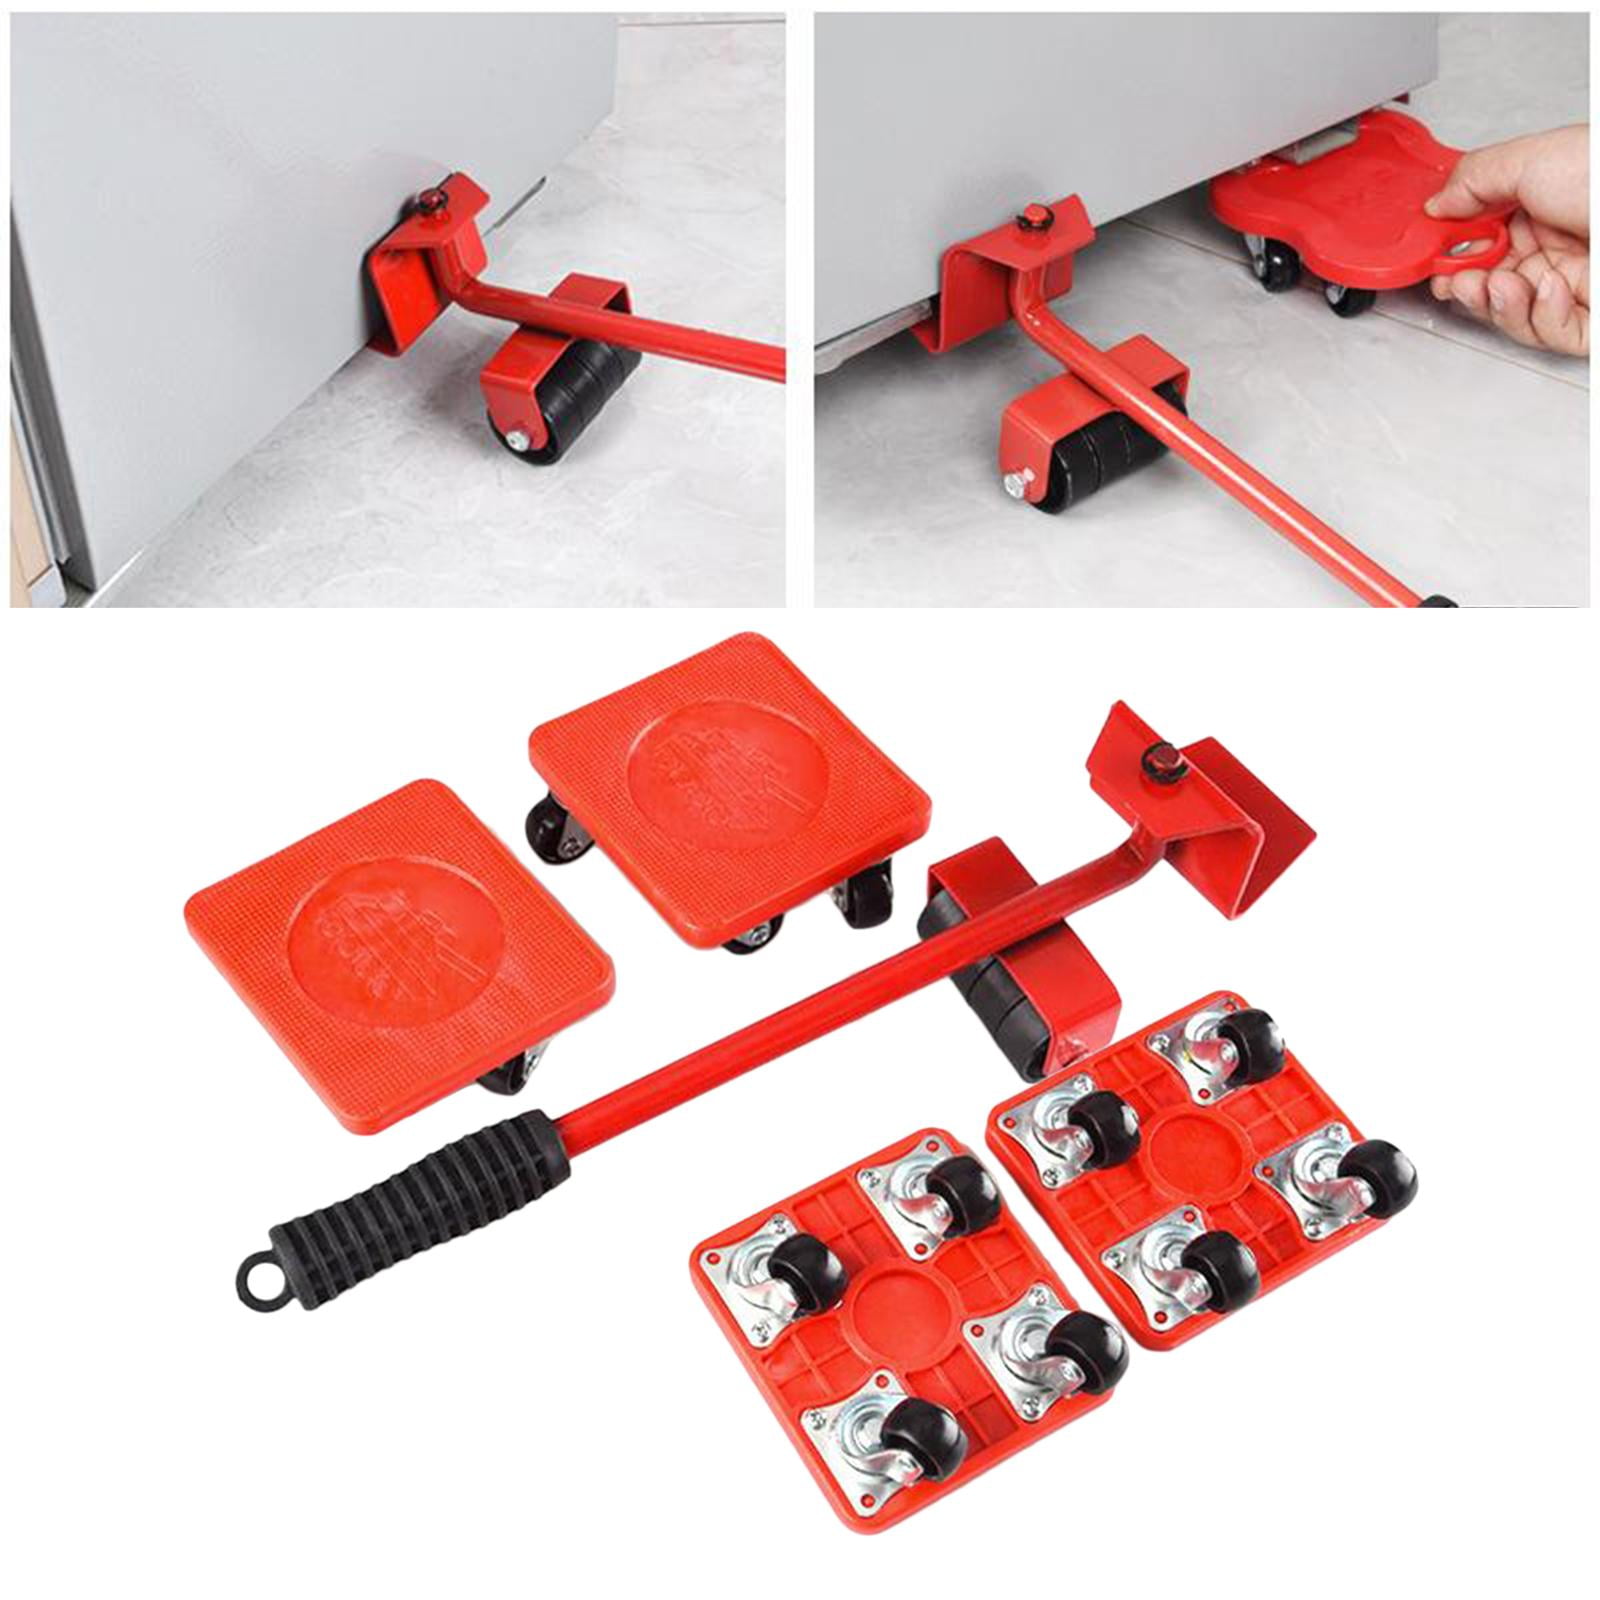 Heavy Duty Furniture Lifter with 4 Sliders and Moving, Appliance Roller Suitable for , Couches and Refrigerators - Upgrade Kits, Size: Multi